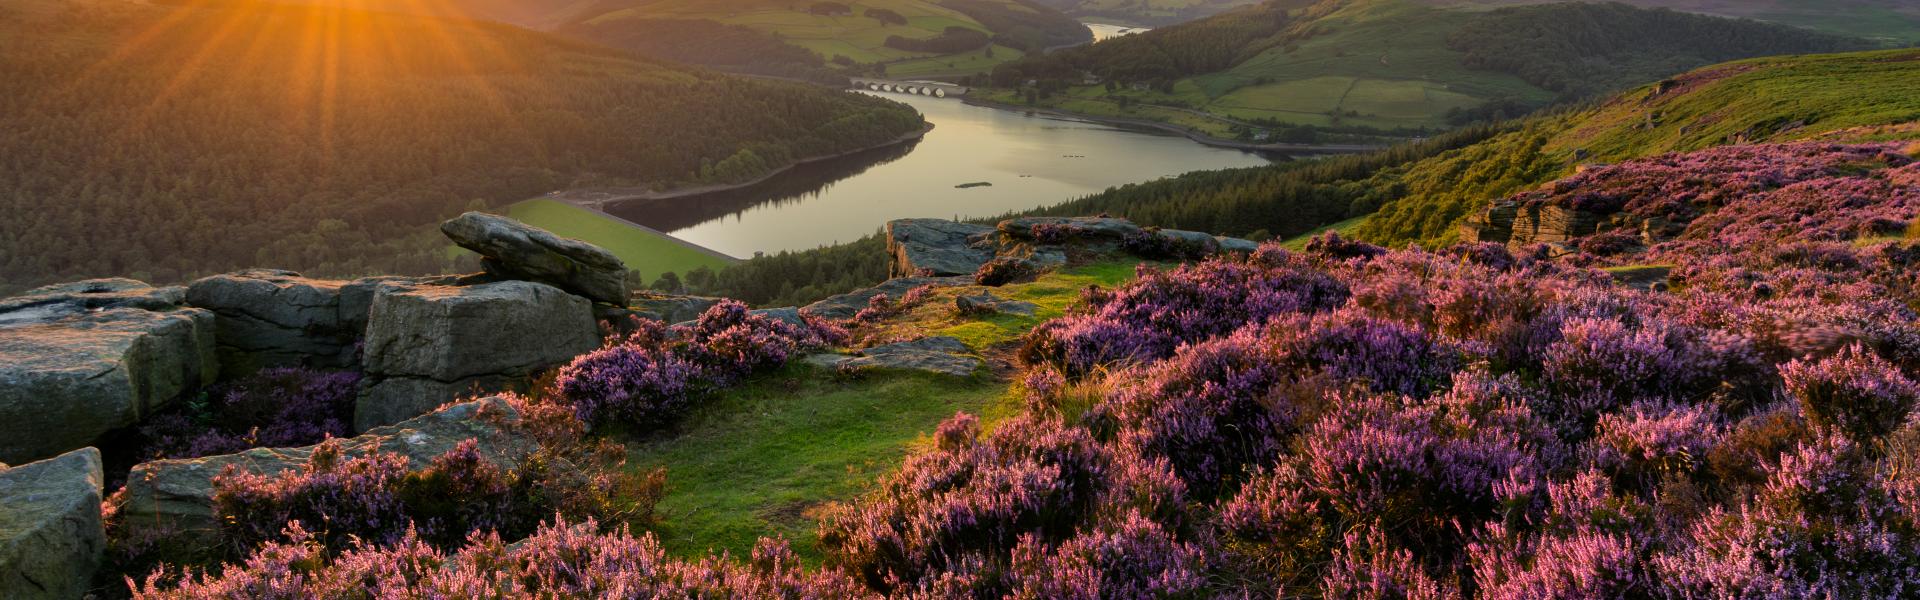 A hill covered in purple heather with a river in the background